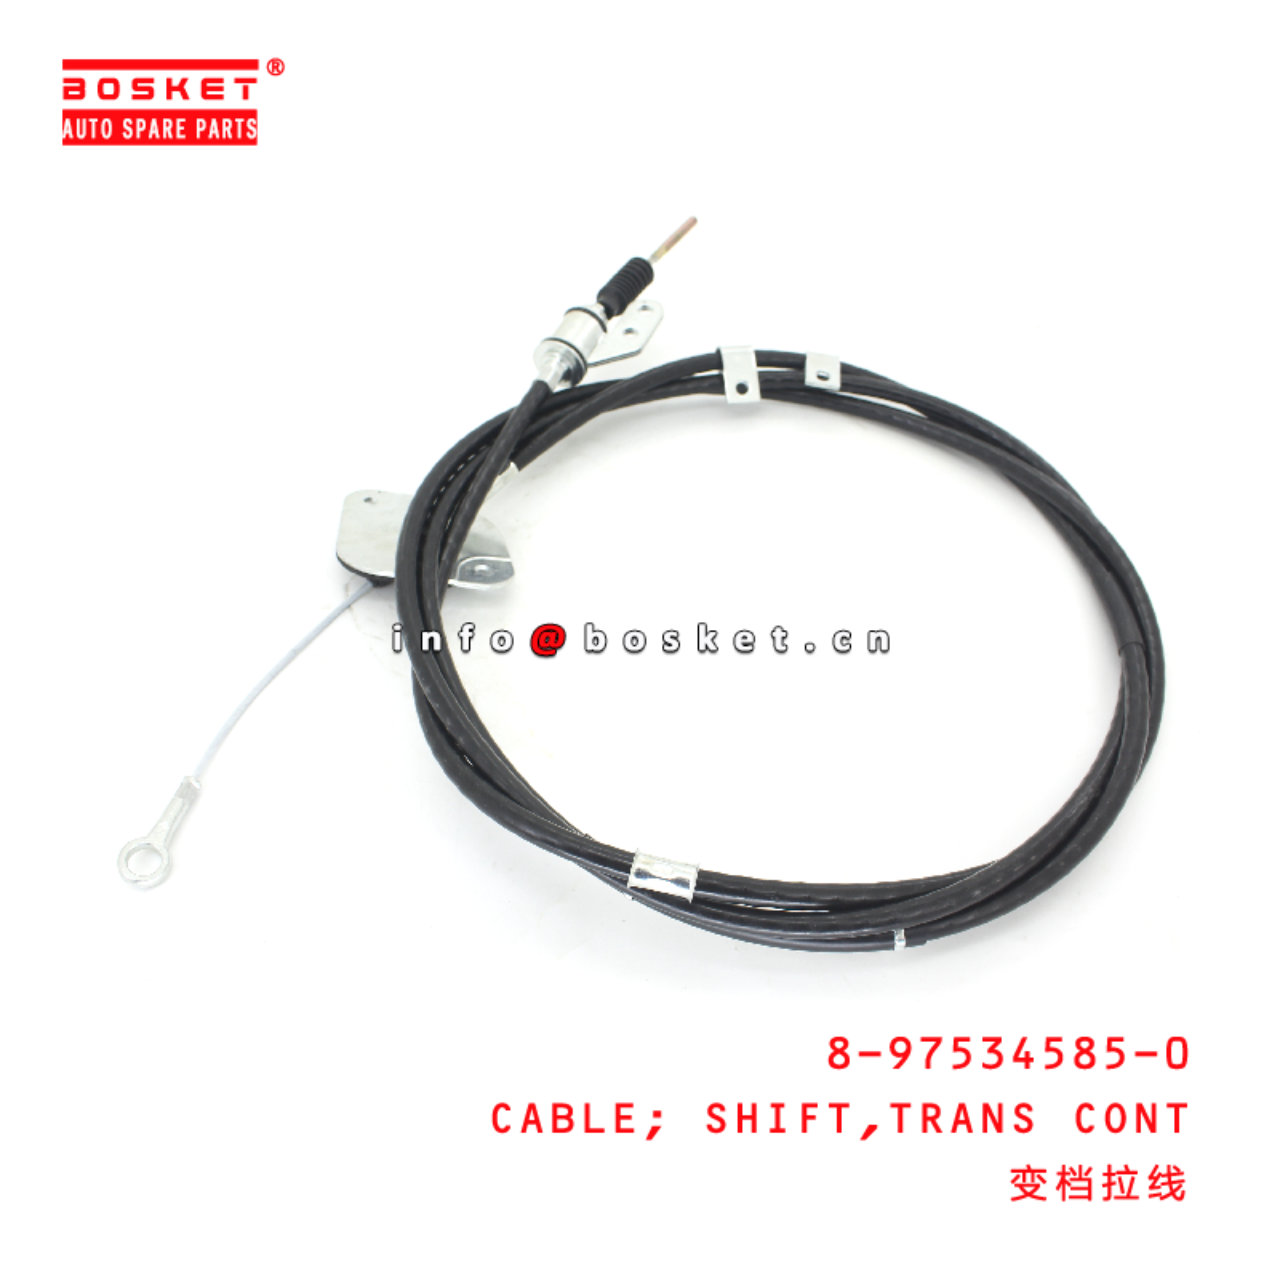 8-97534585-0 TRANSMISSION CONTROL SHIFT CABLE suitable for ISUZU 8975345850